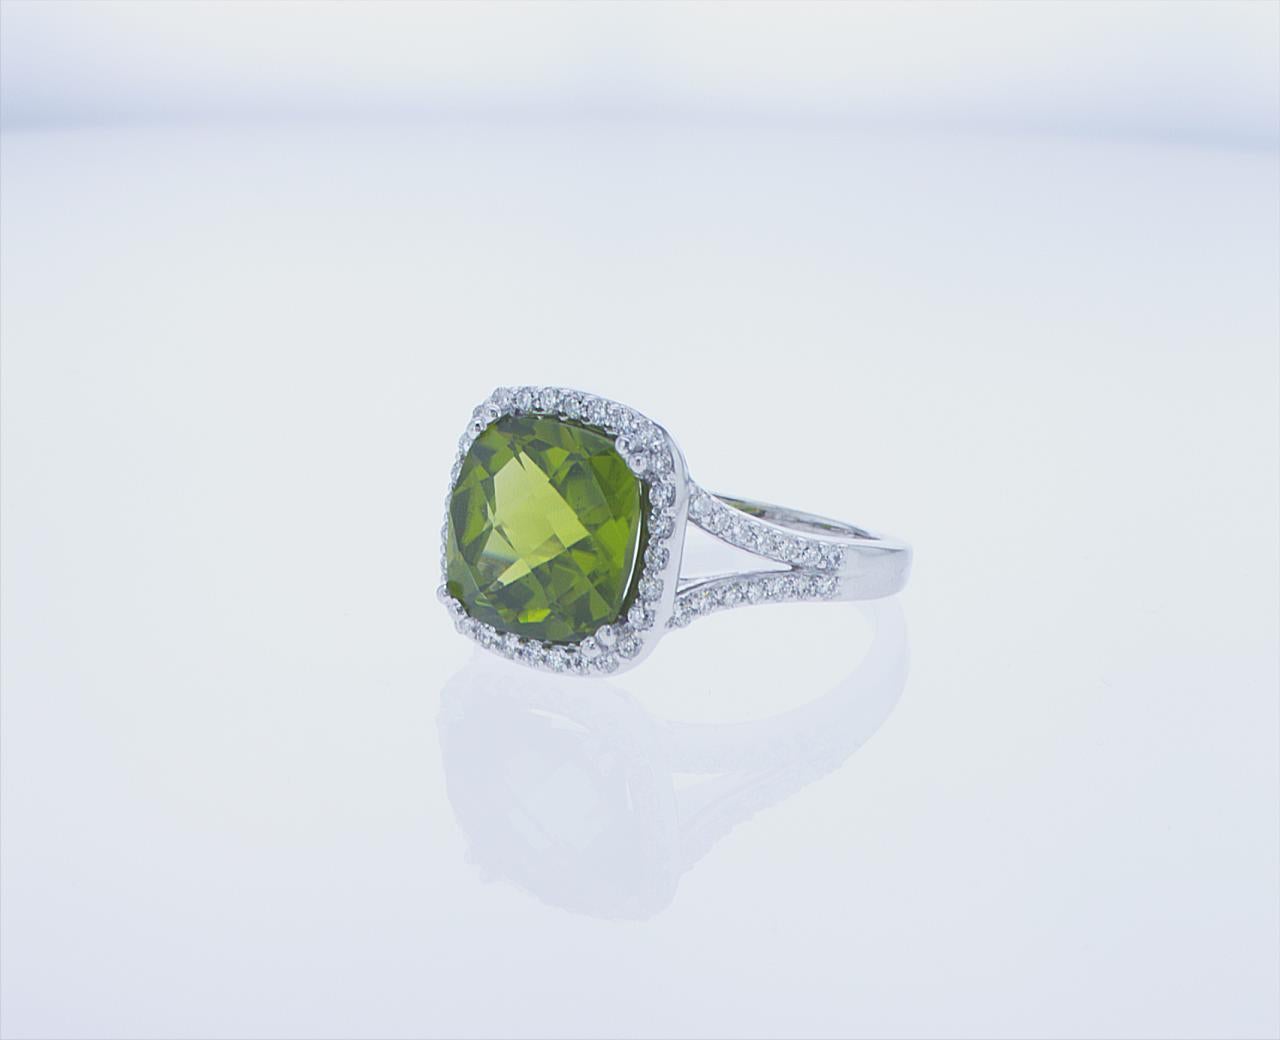 Cushion Cut 5.18ct Cushion Shape Peridot Cocktail Ring in 14k White Gold For Sale